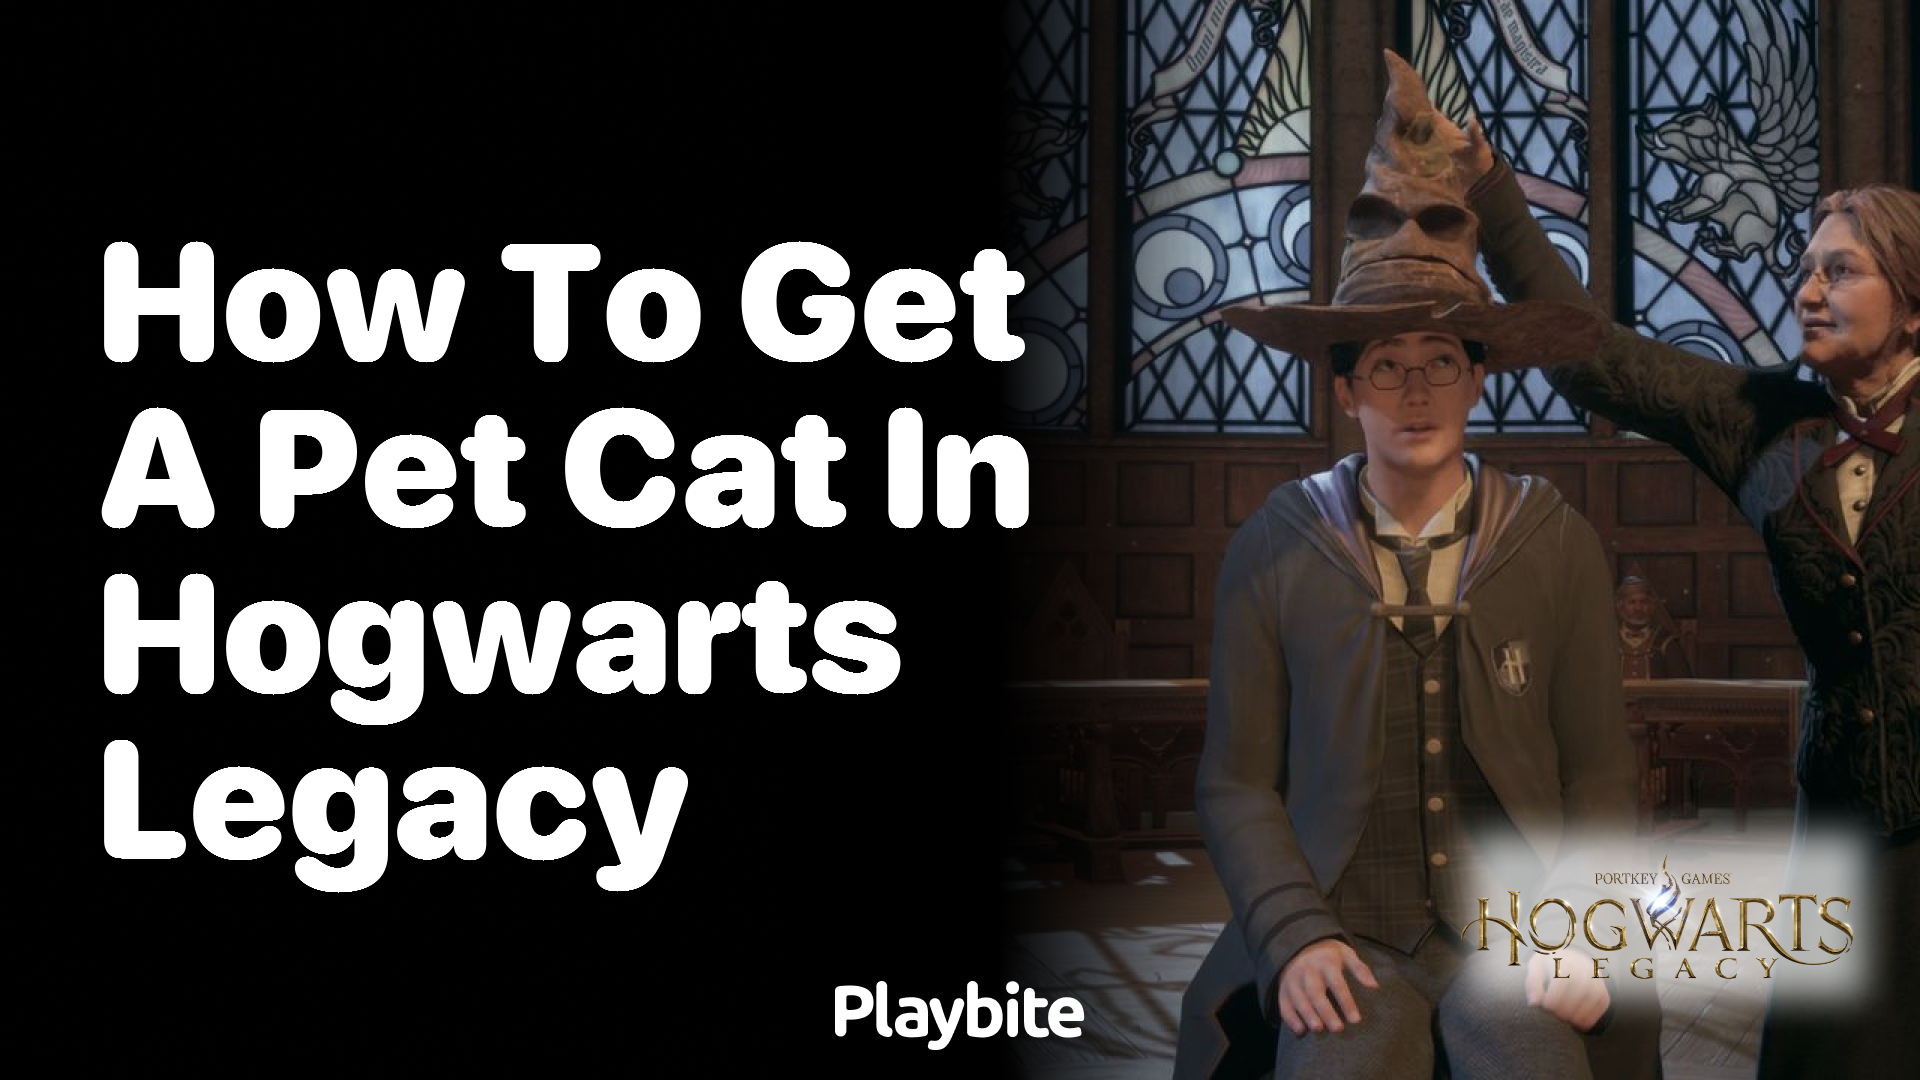 How to Get a Pet Cat in Hogwarts Legacy